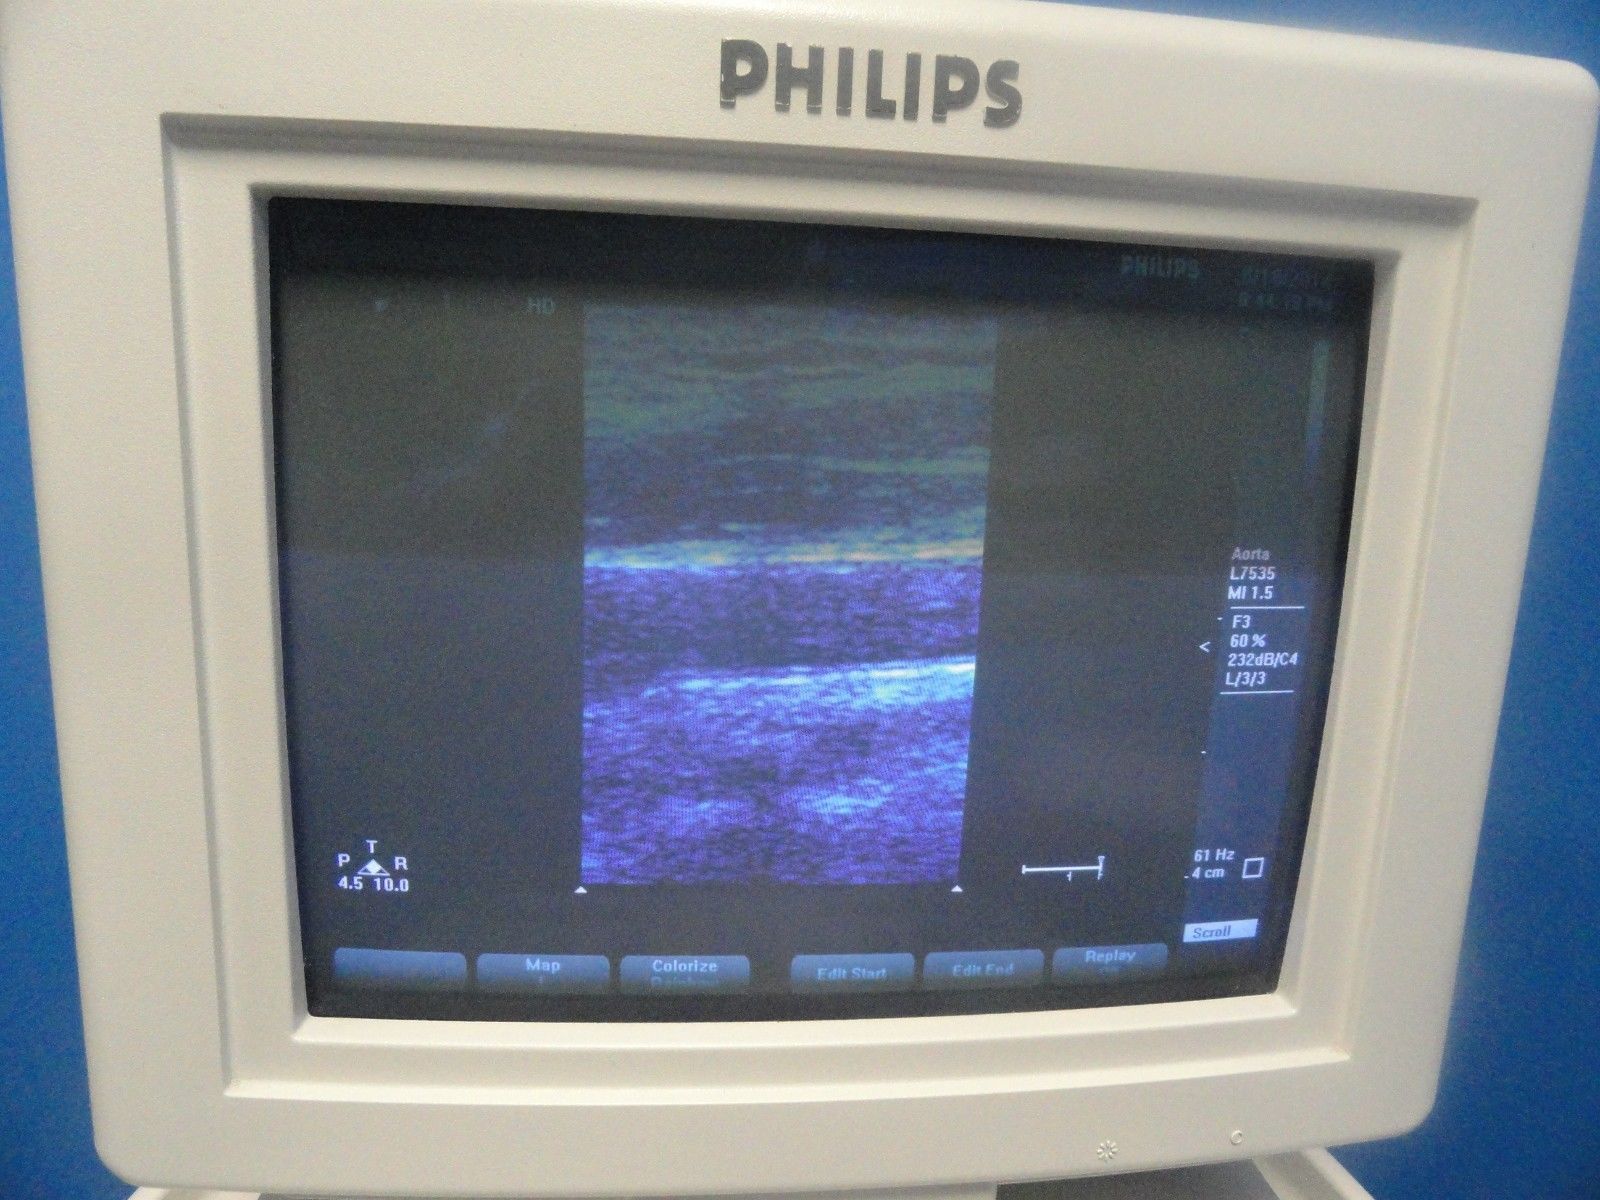 a computer monitor with a picture of a BODY PART the screen